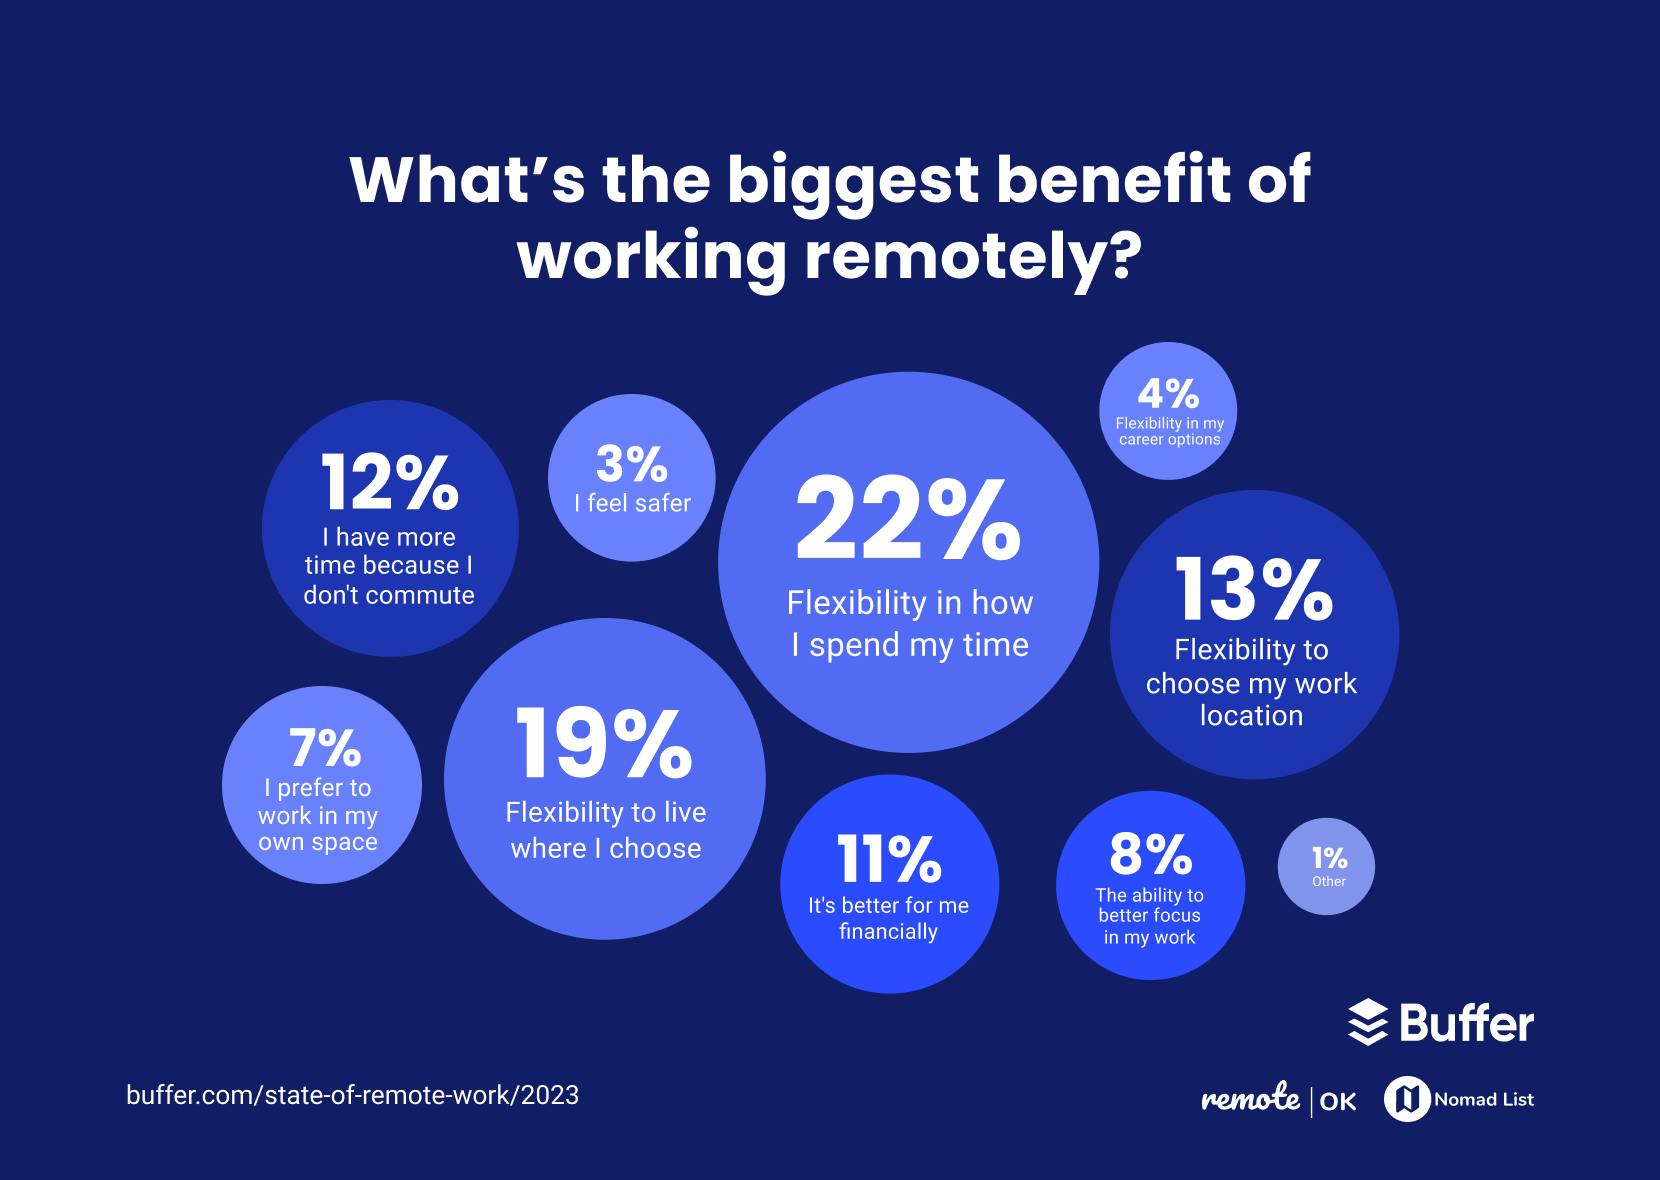 Top 7 IT challenges to managing a remote workforce